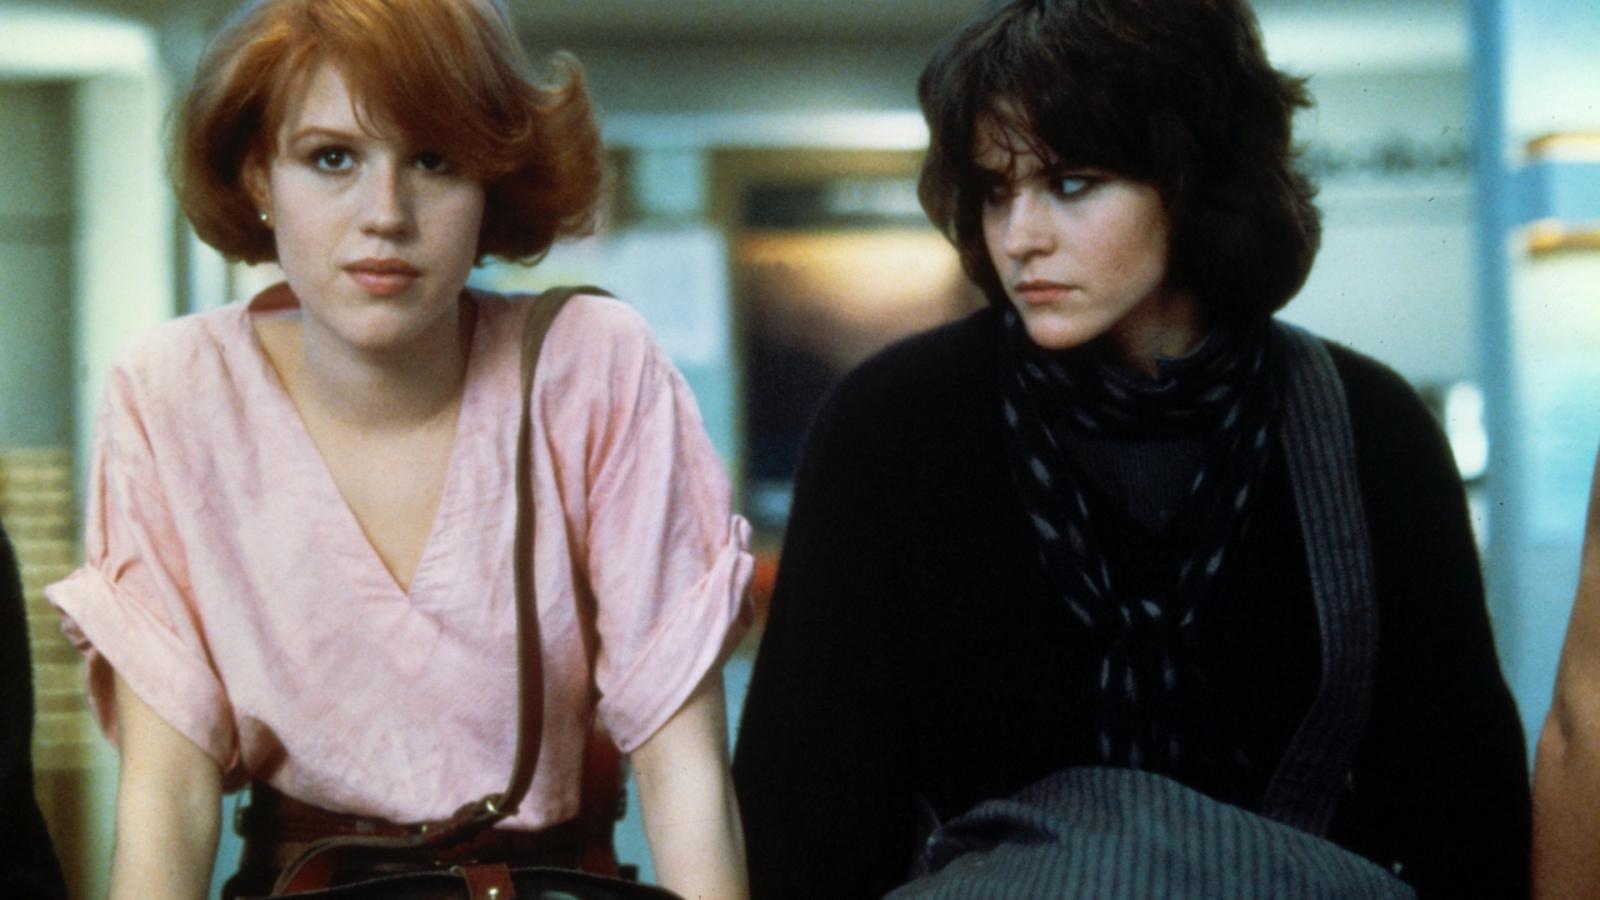 15 Coming-of-Age Movies that Defined the 80s - image 2